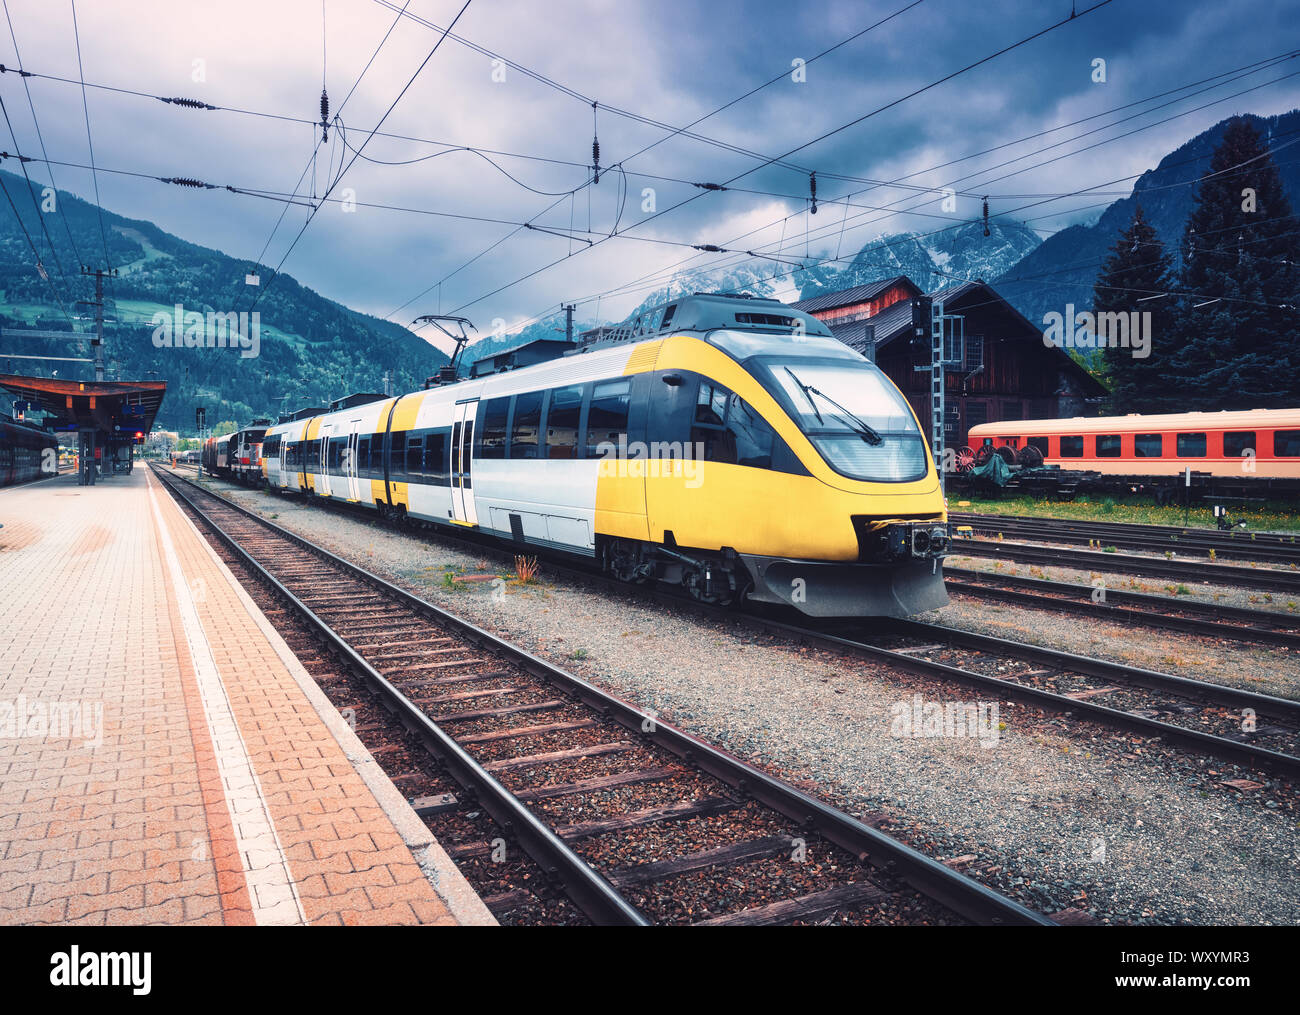 Beautiful high speed train on the railway station in mountains Stock Photo